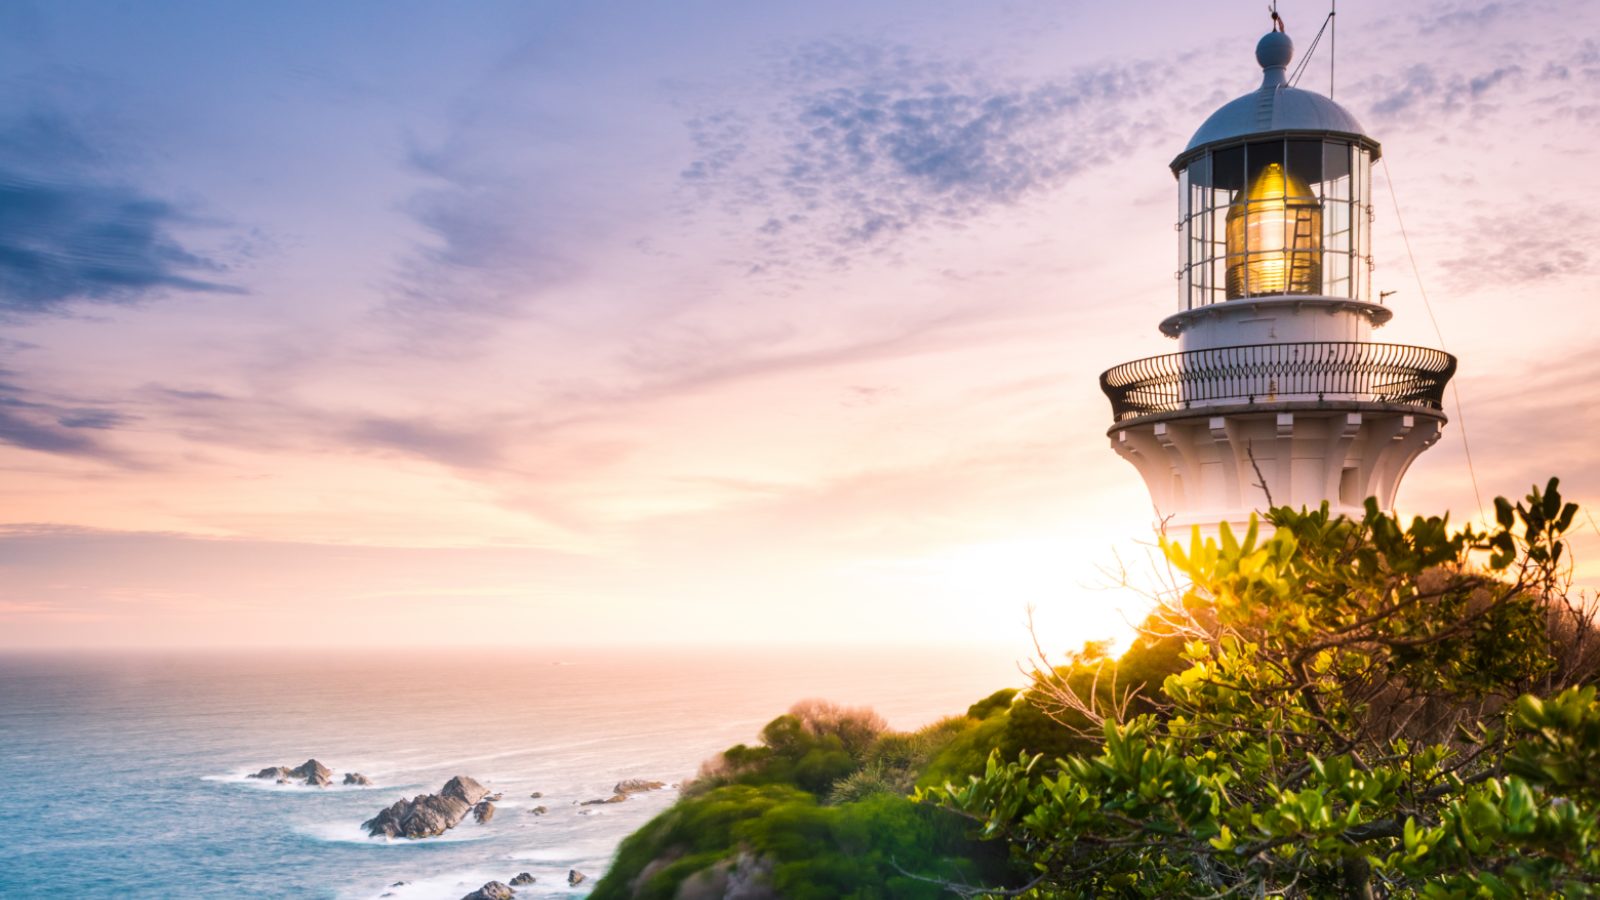 Sugarloaf Point Lighthouse at Seal Rocks (photo: Aiden Cunningham)